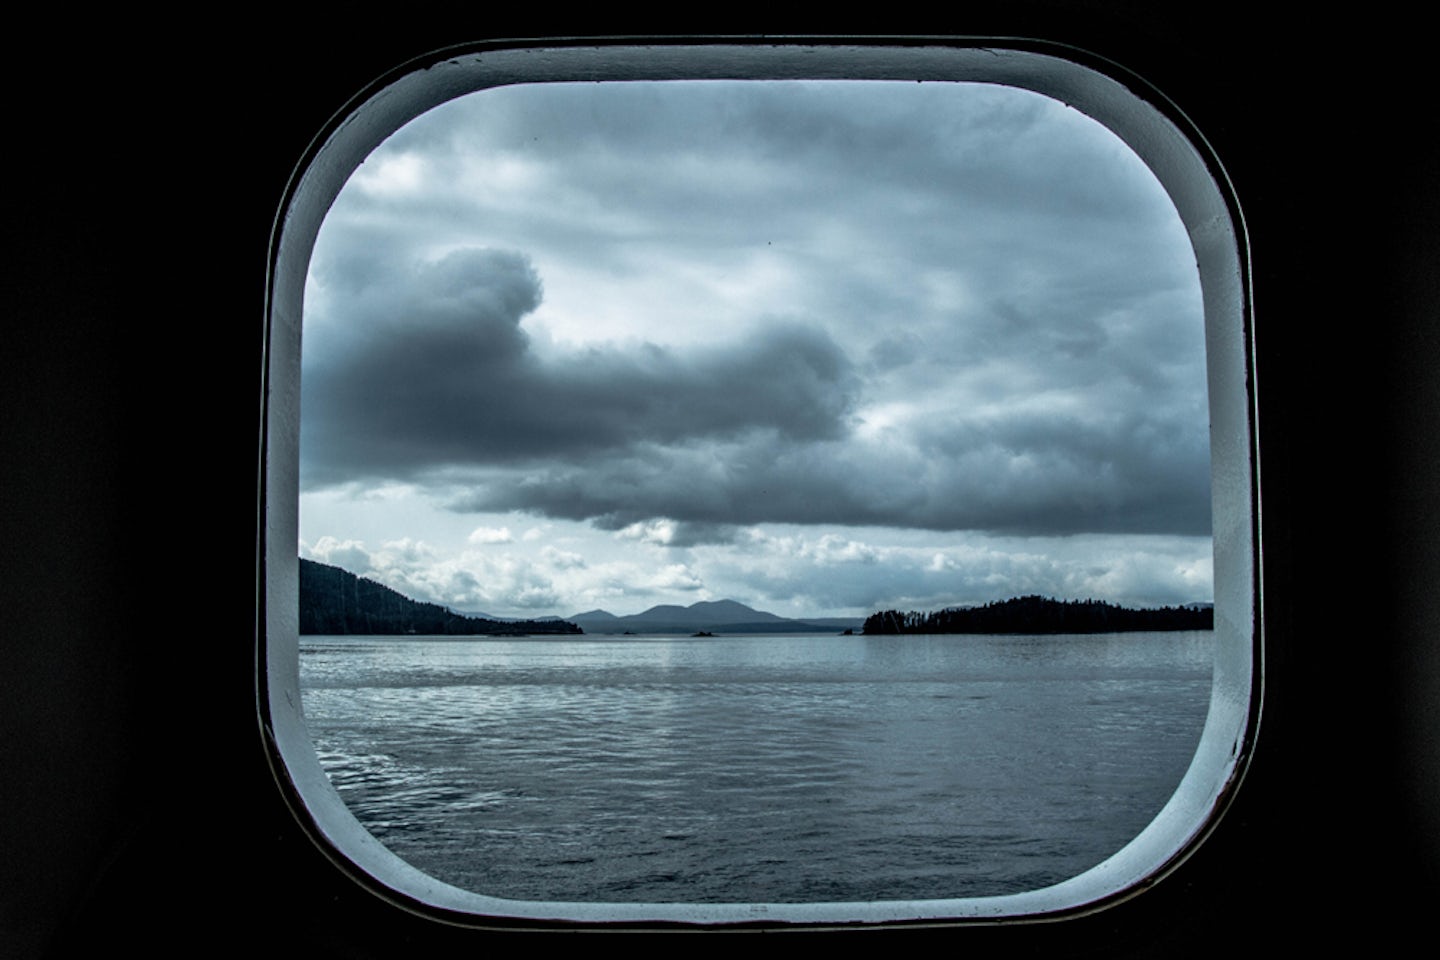 Docked in Sitka Alaska...The image out of the window so quite and serene, can